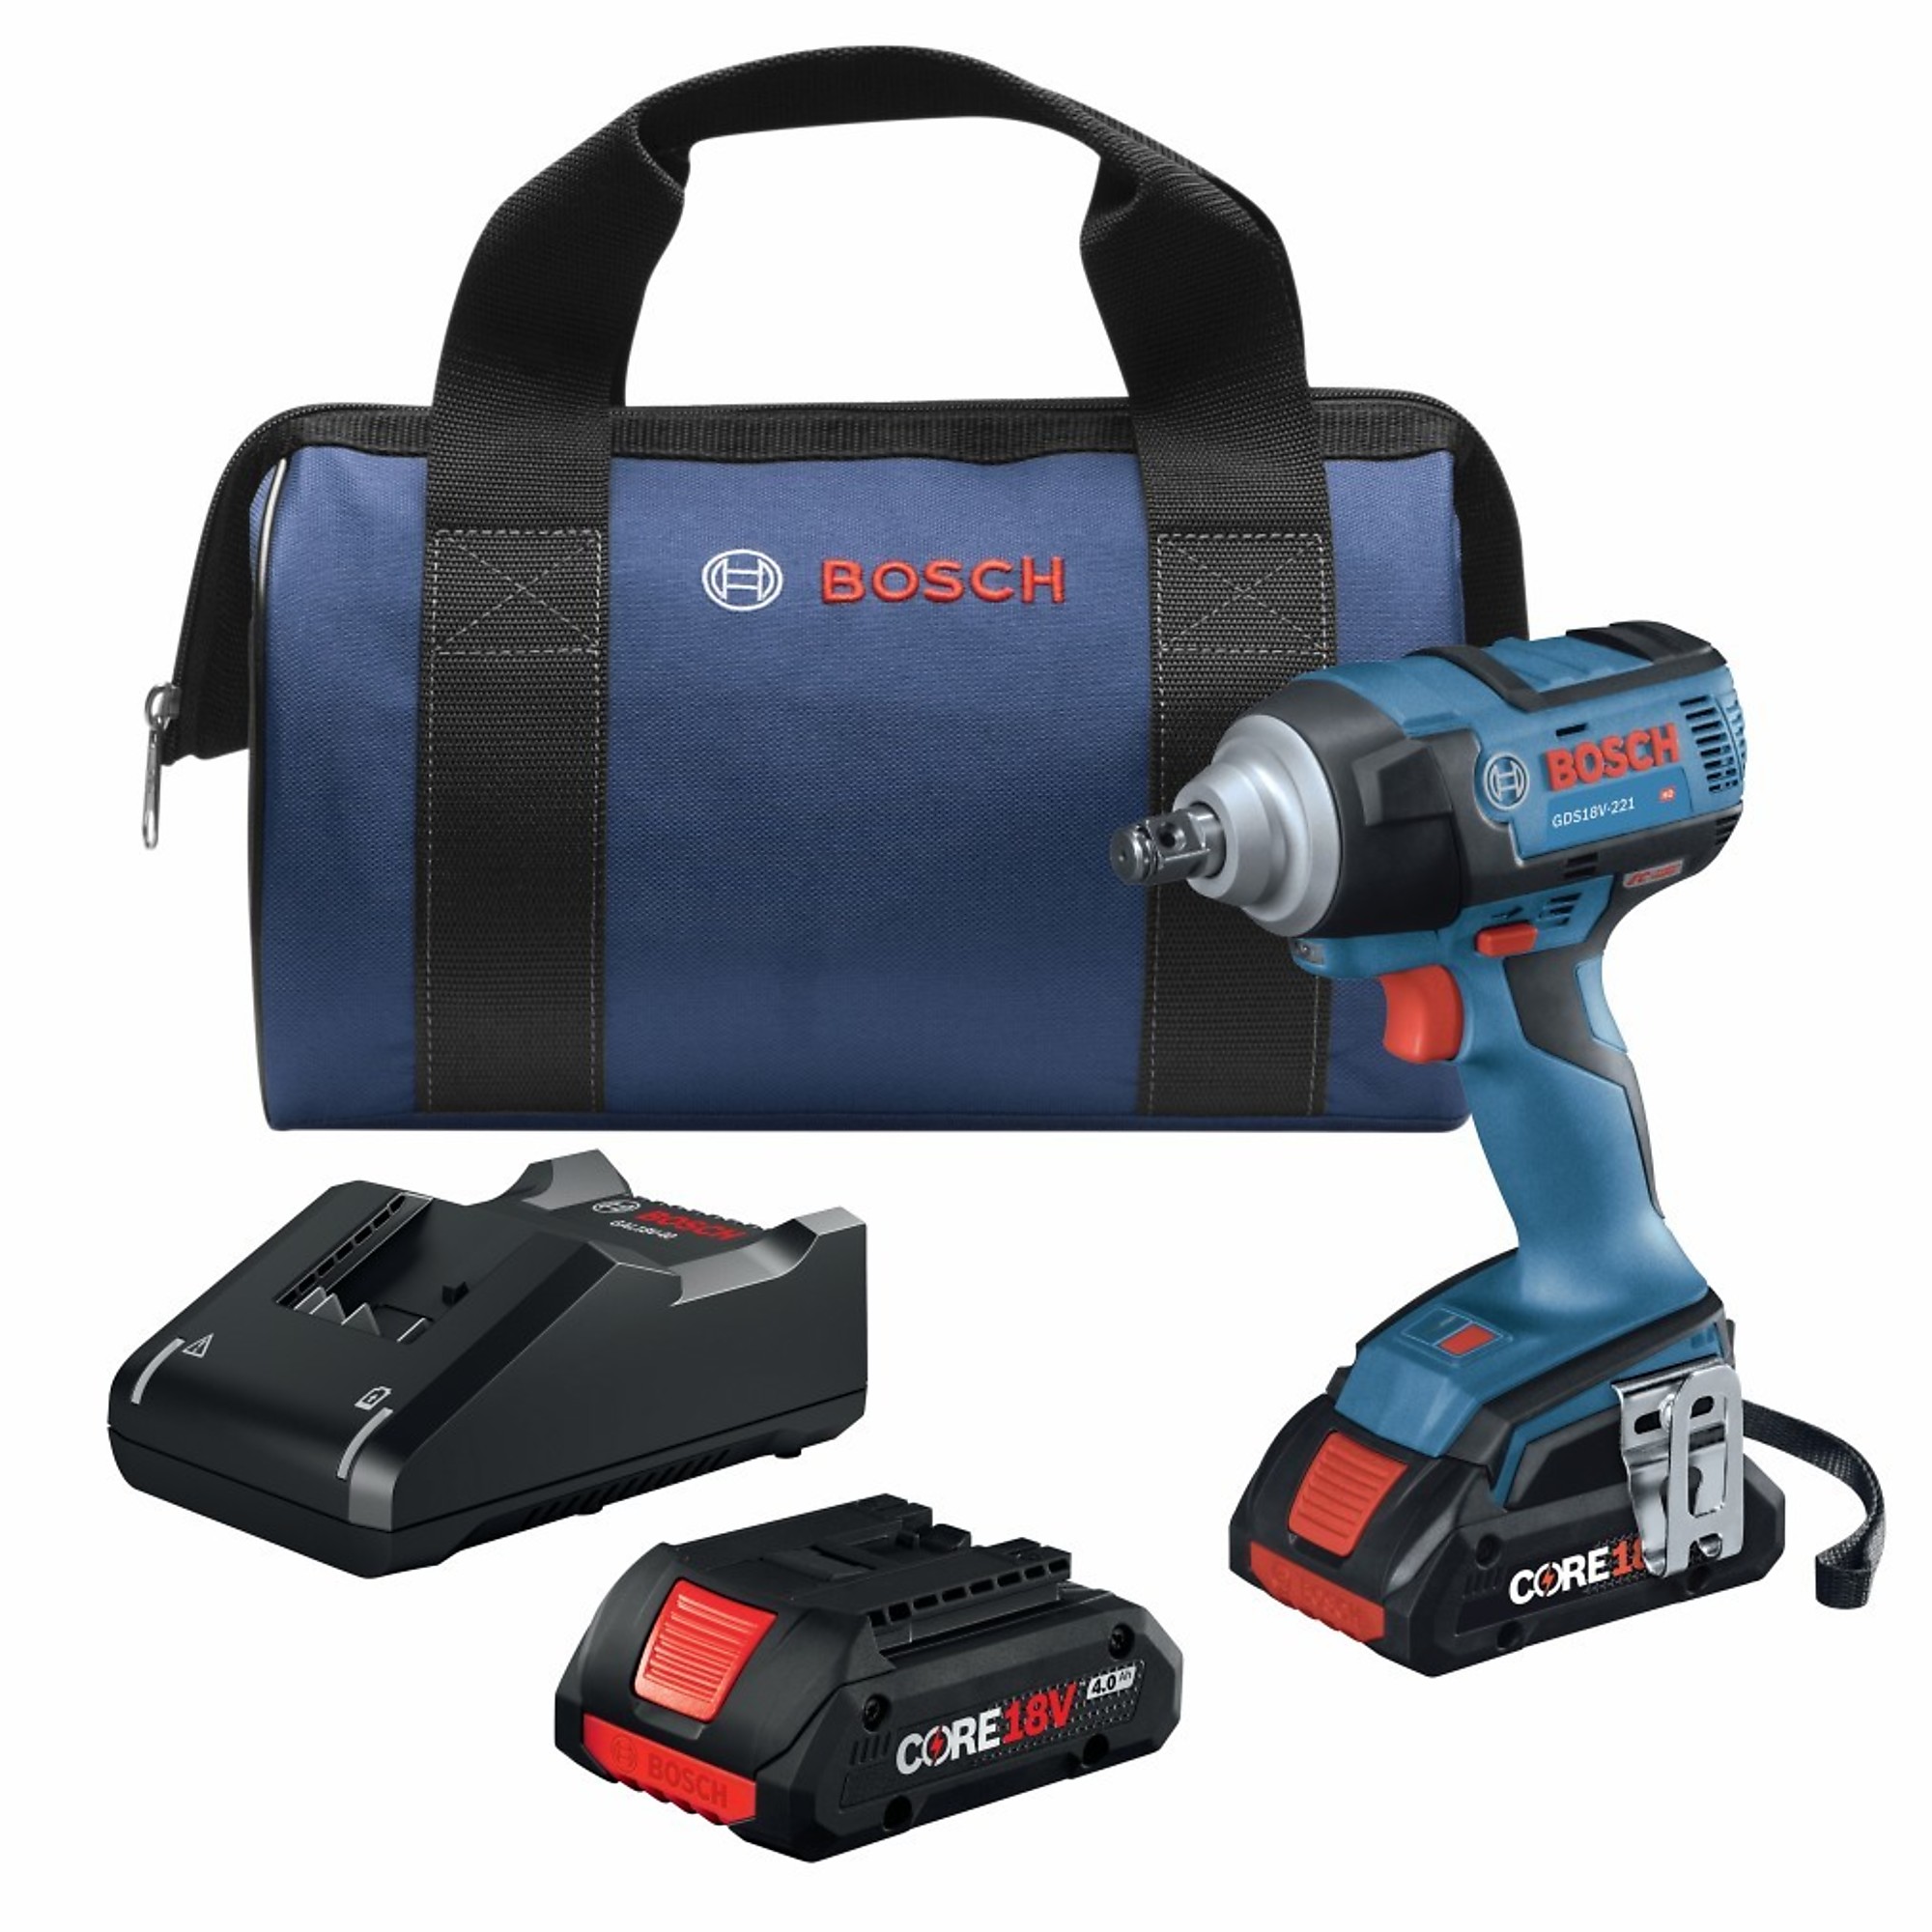 Bosch, 18V 1/2Inch Impact Wrench Kit 2 4.0 Ah Batteries, Drive Size 1/2 in, Volts 18, Battery Type Lithium-ion, Model GDS18V-221B25